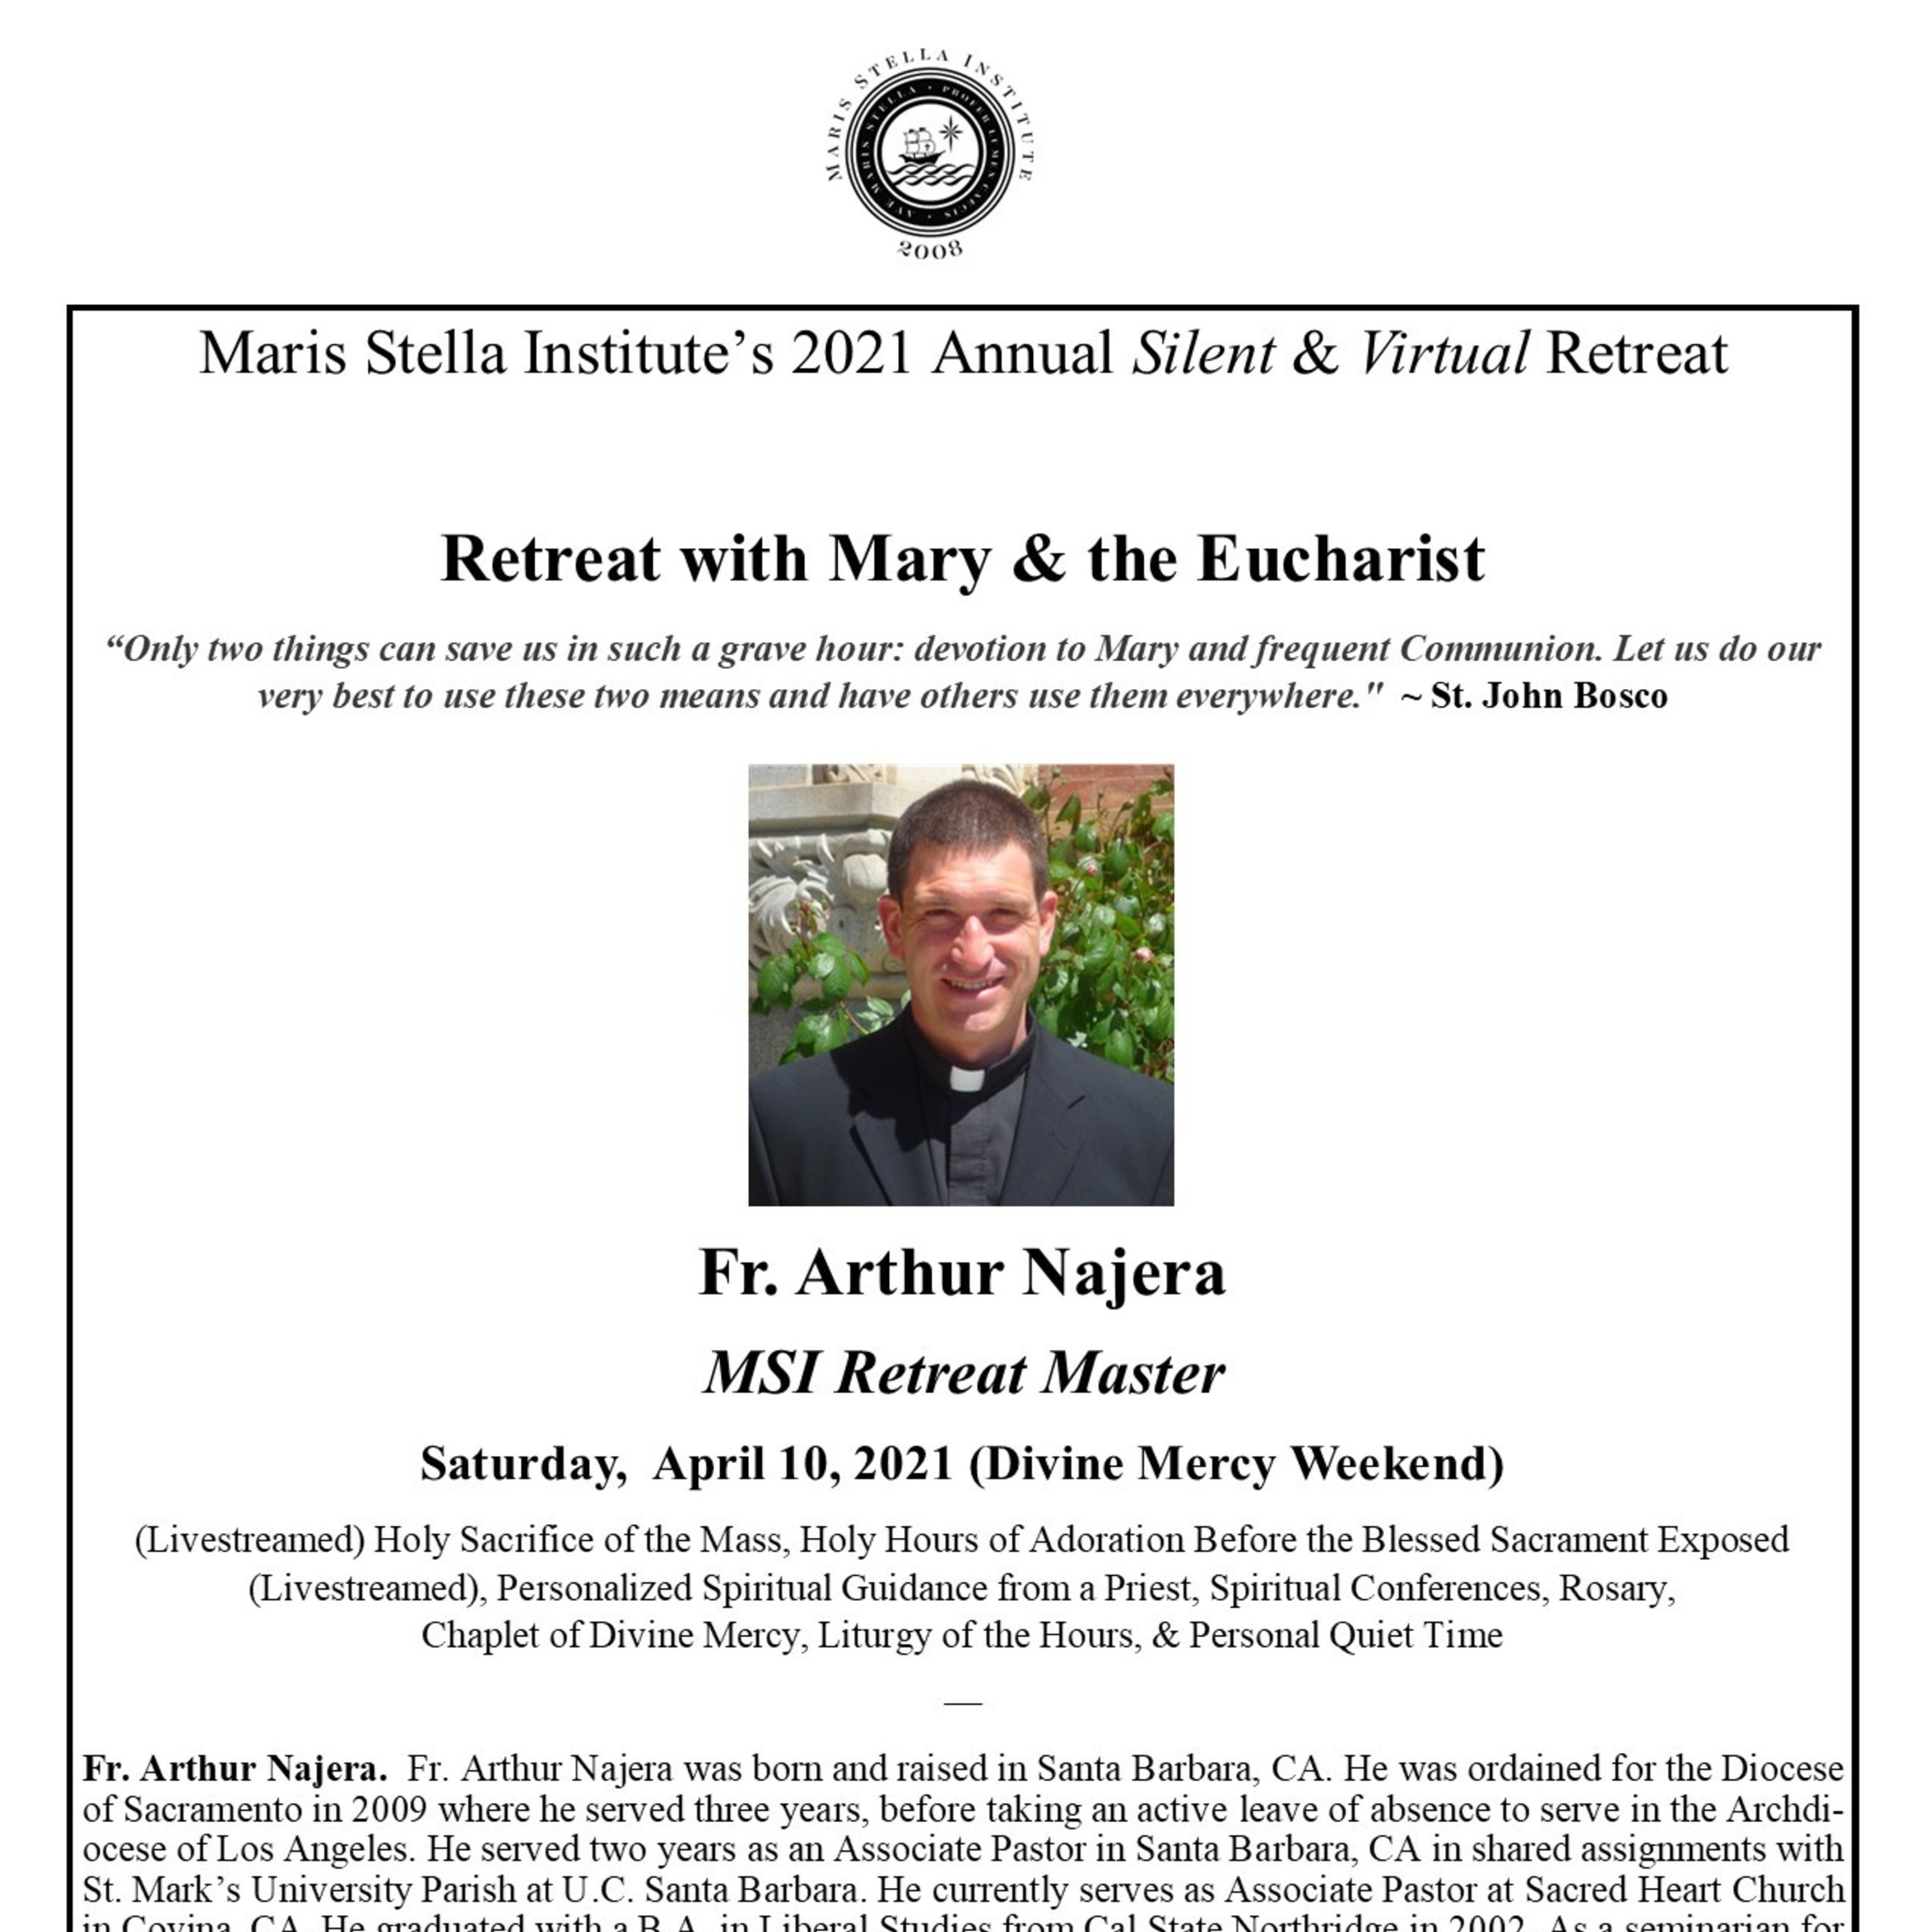 Retreat with Mary & the Eucharist